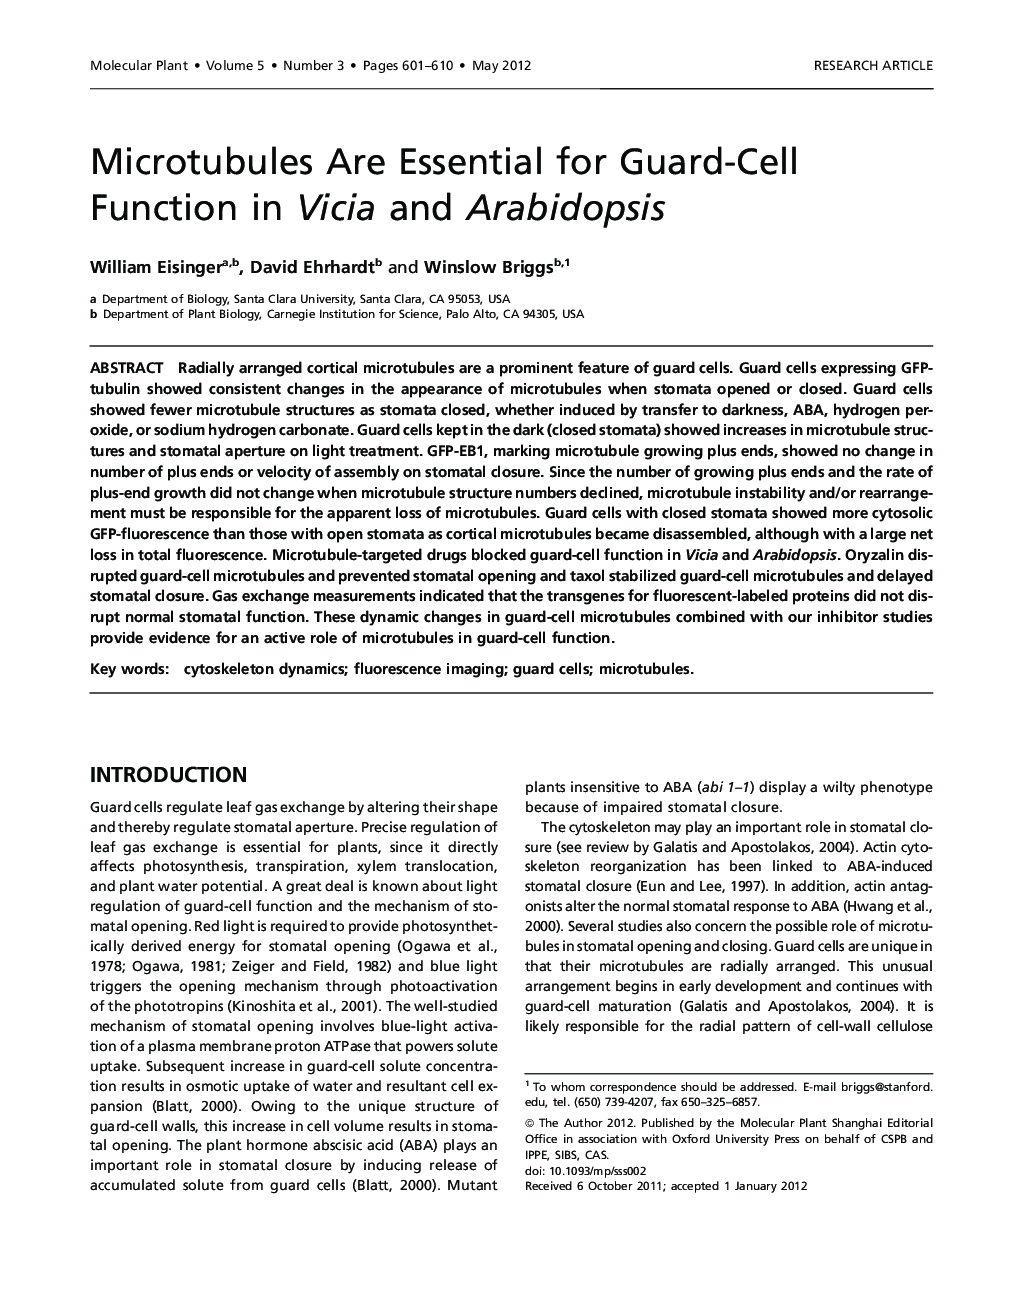 Microtubules Are Essential for Guard-Cell Function in Vicia and Arabidopsis 